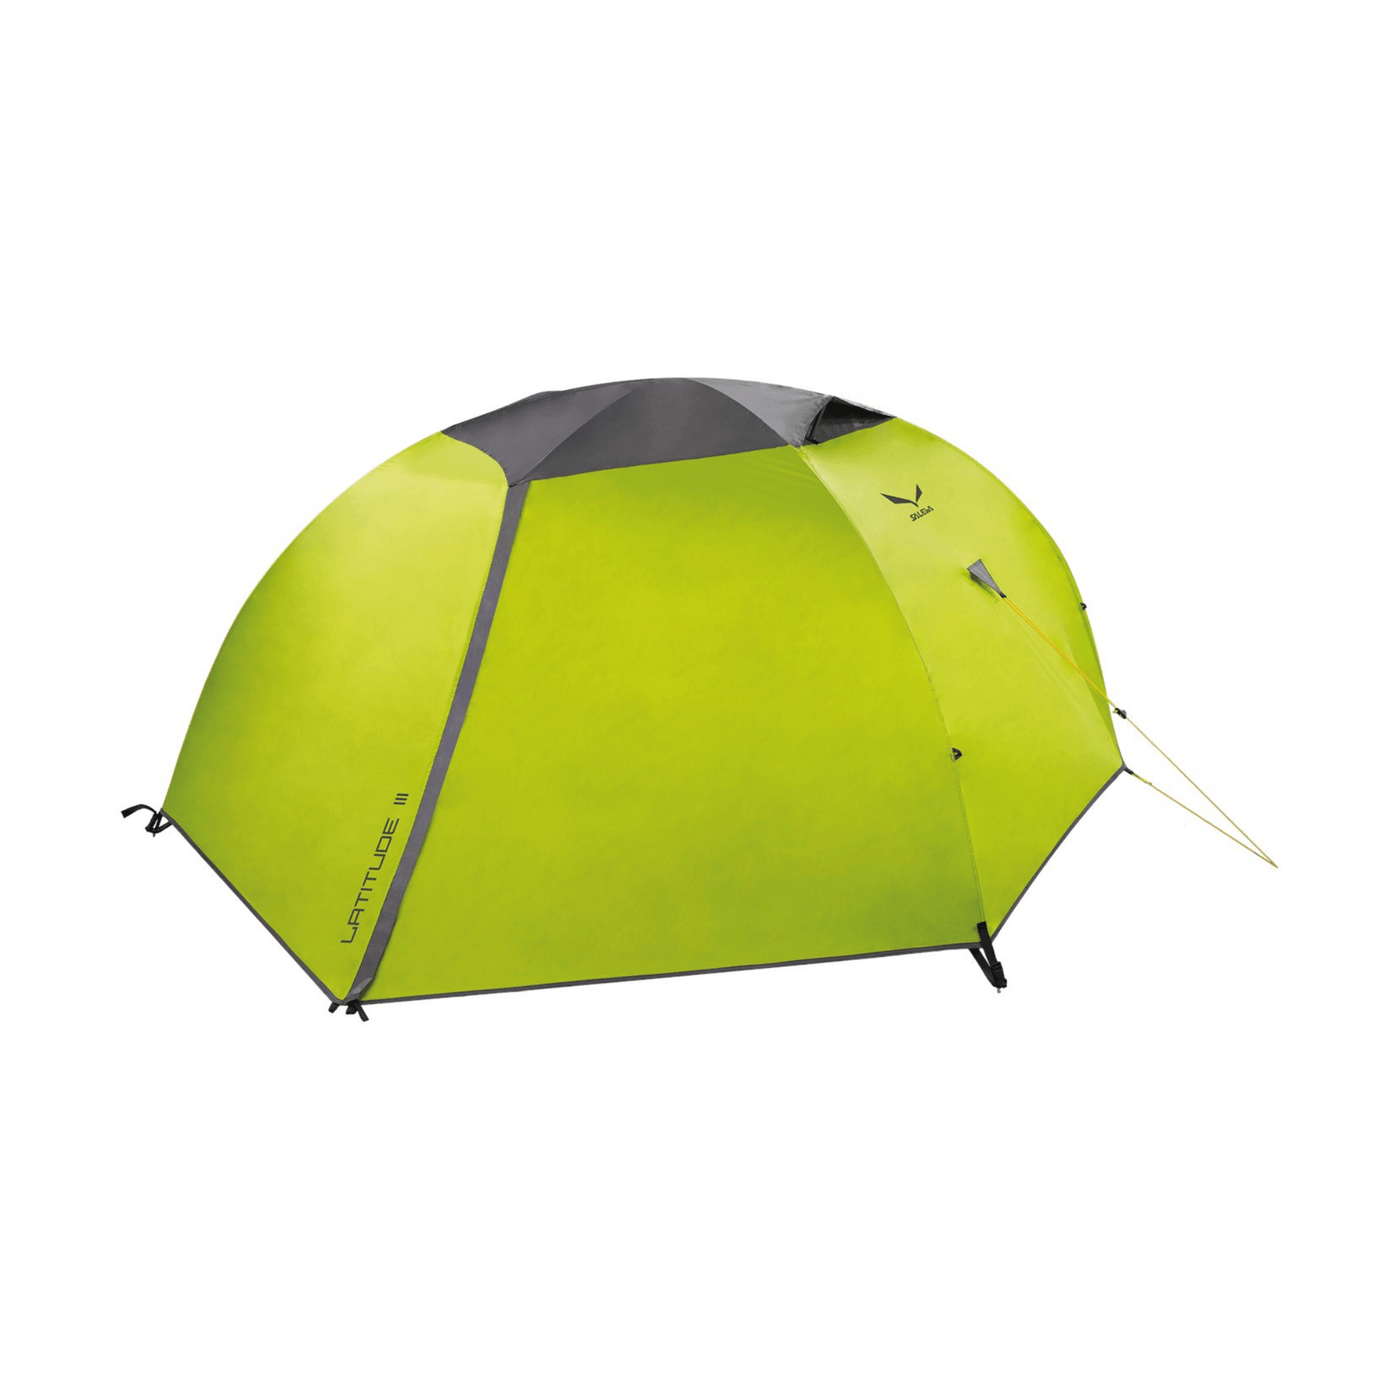 Salewa Latitude III Tent | 3 Person Dome Tent | Further Faster Christchurch NZ | #cactus-grey